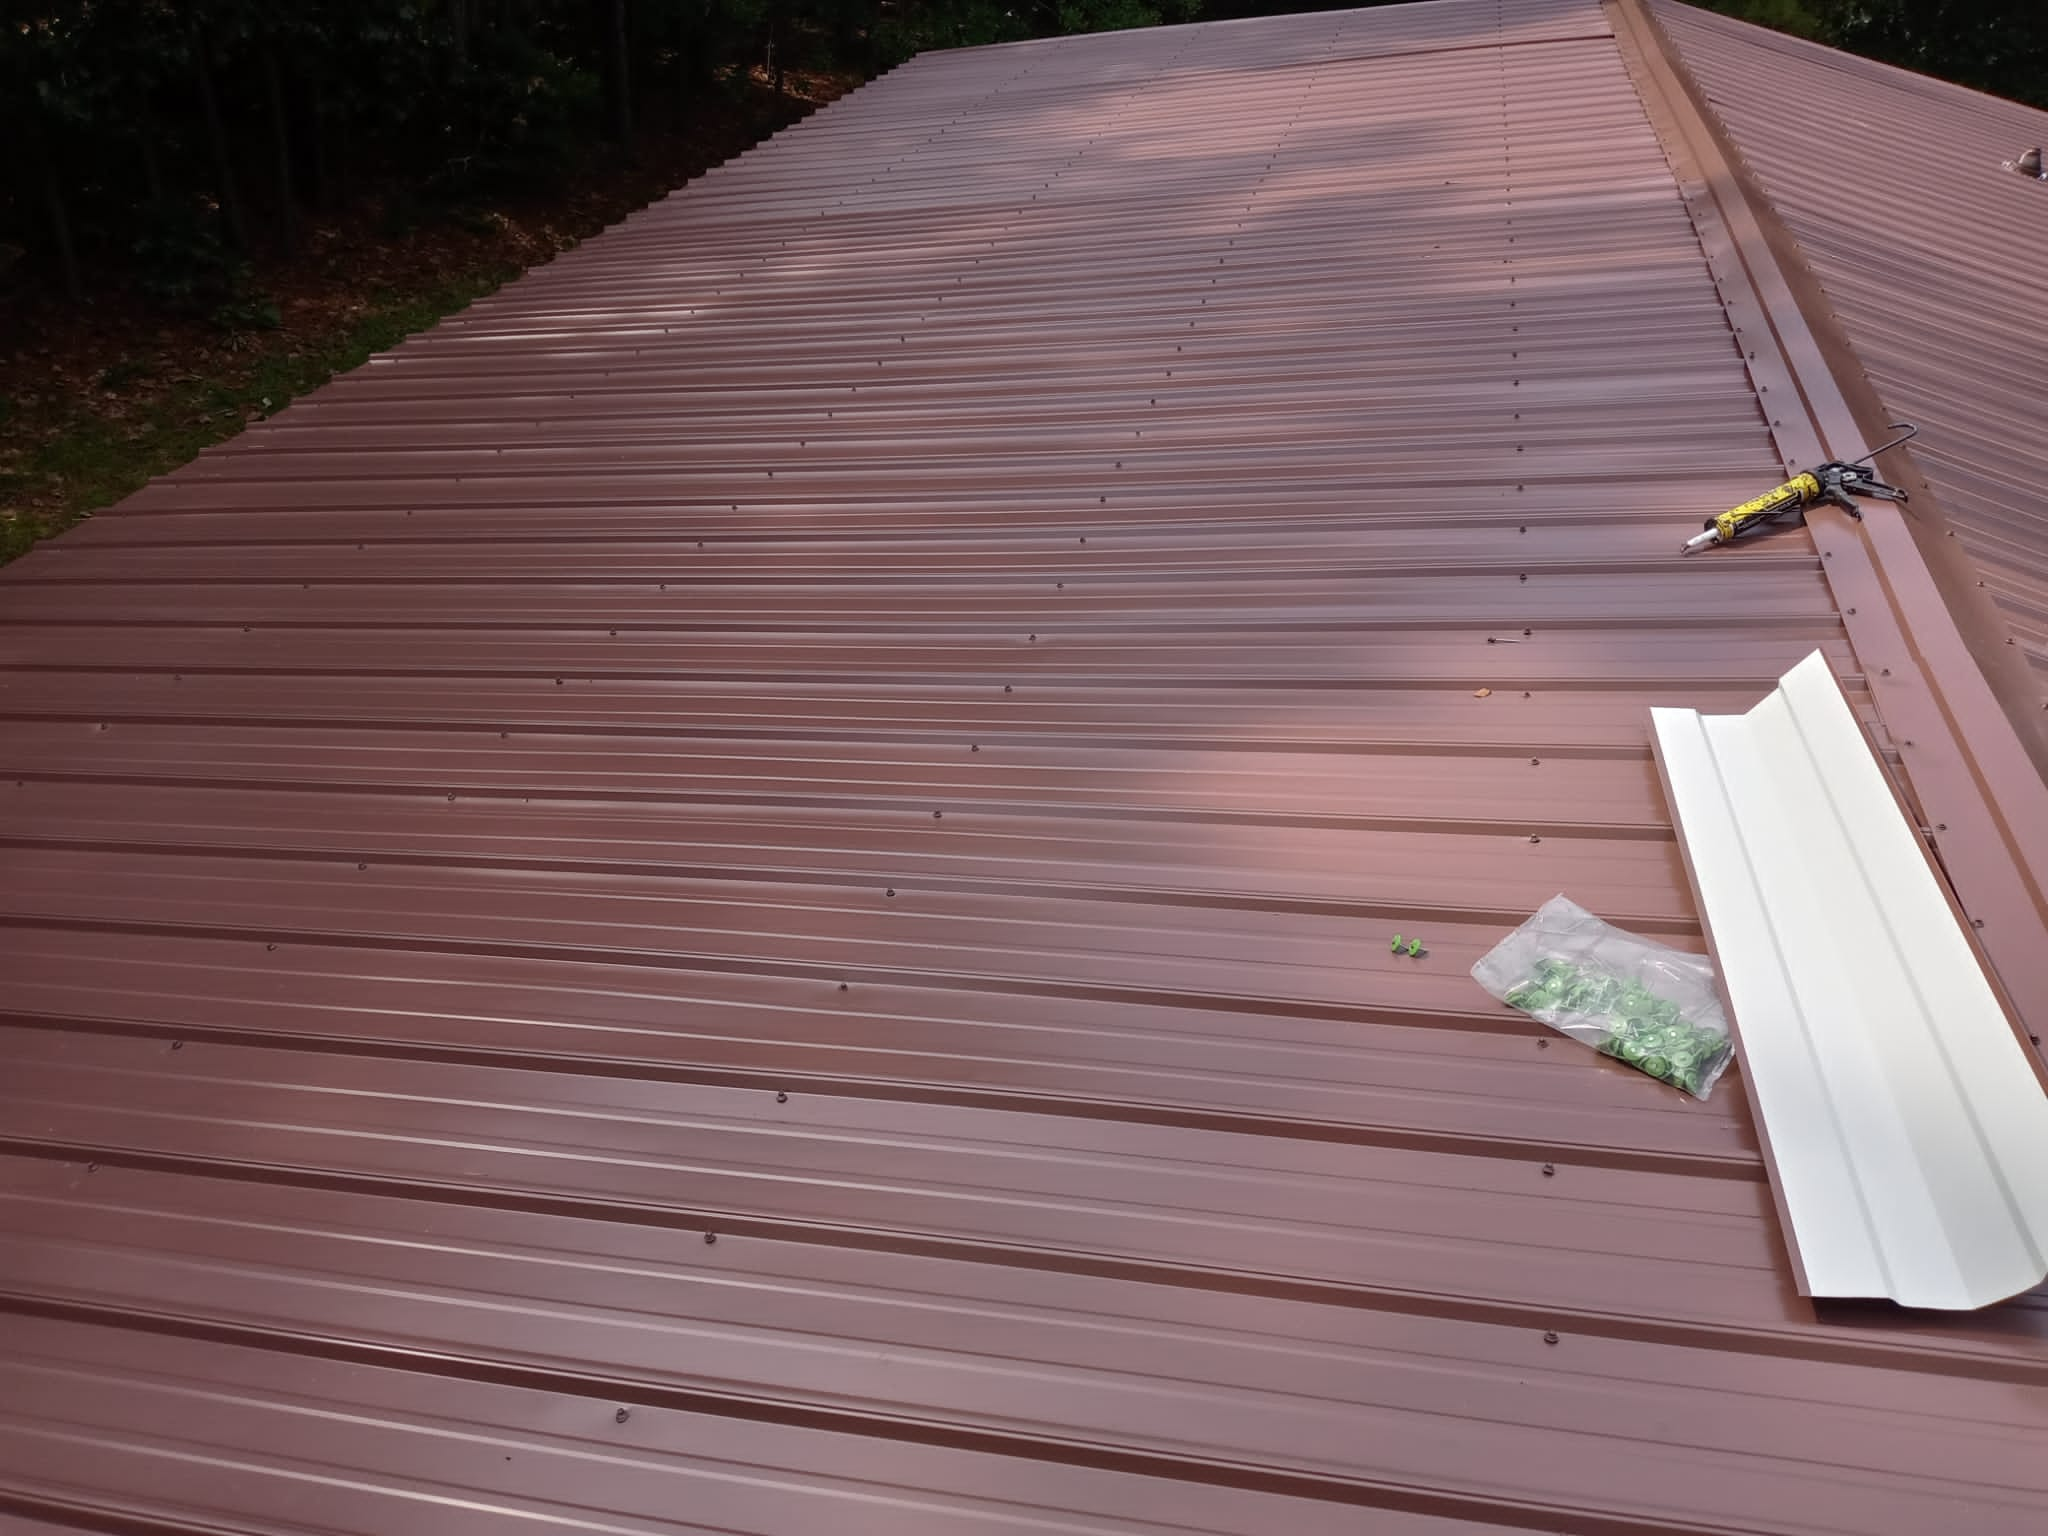 A standing seam metal roof in a maroon shade has been installed by Gator Metal Roofing.